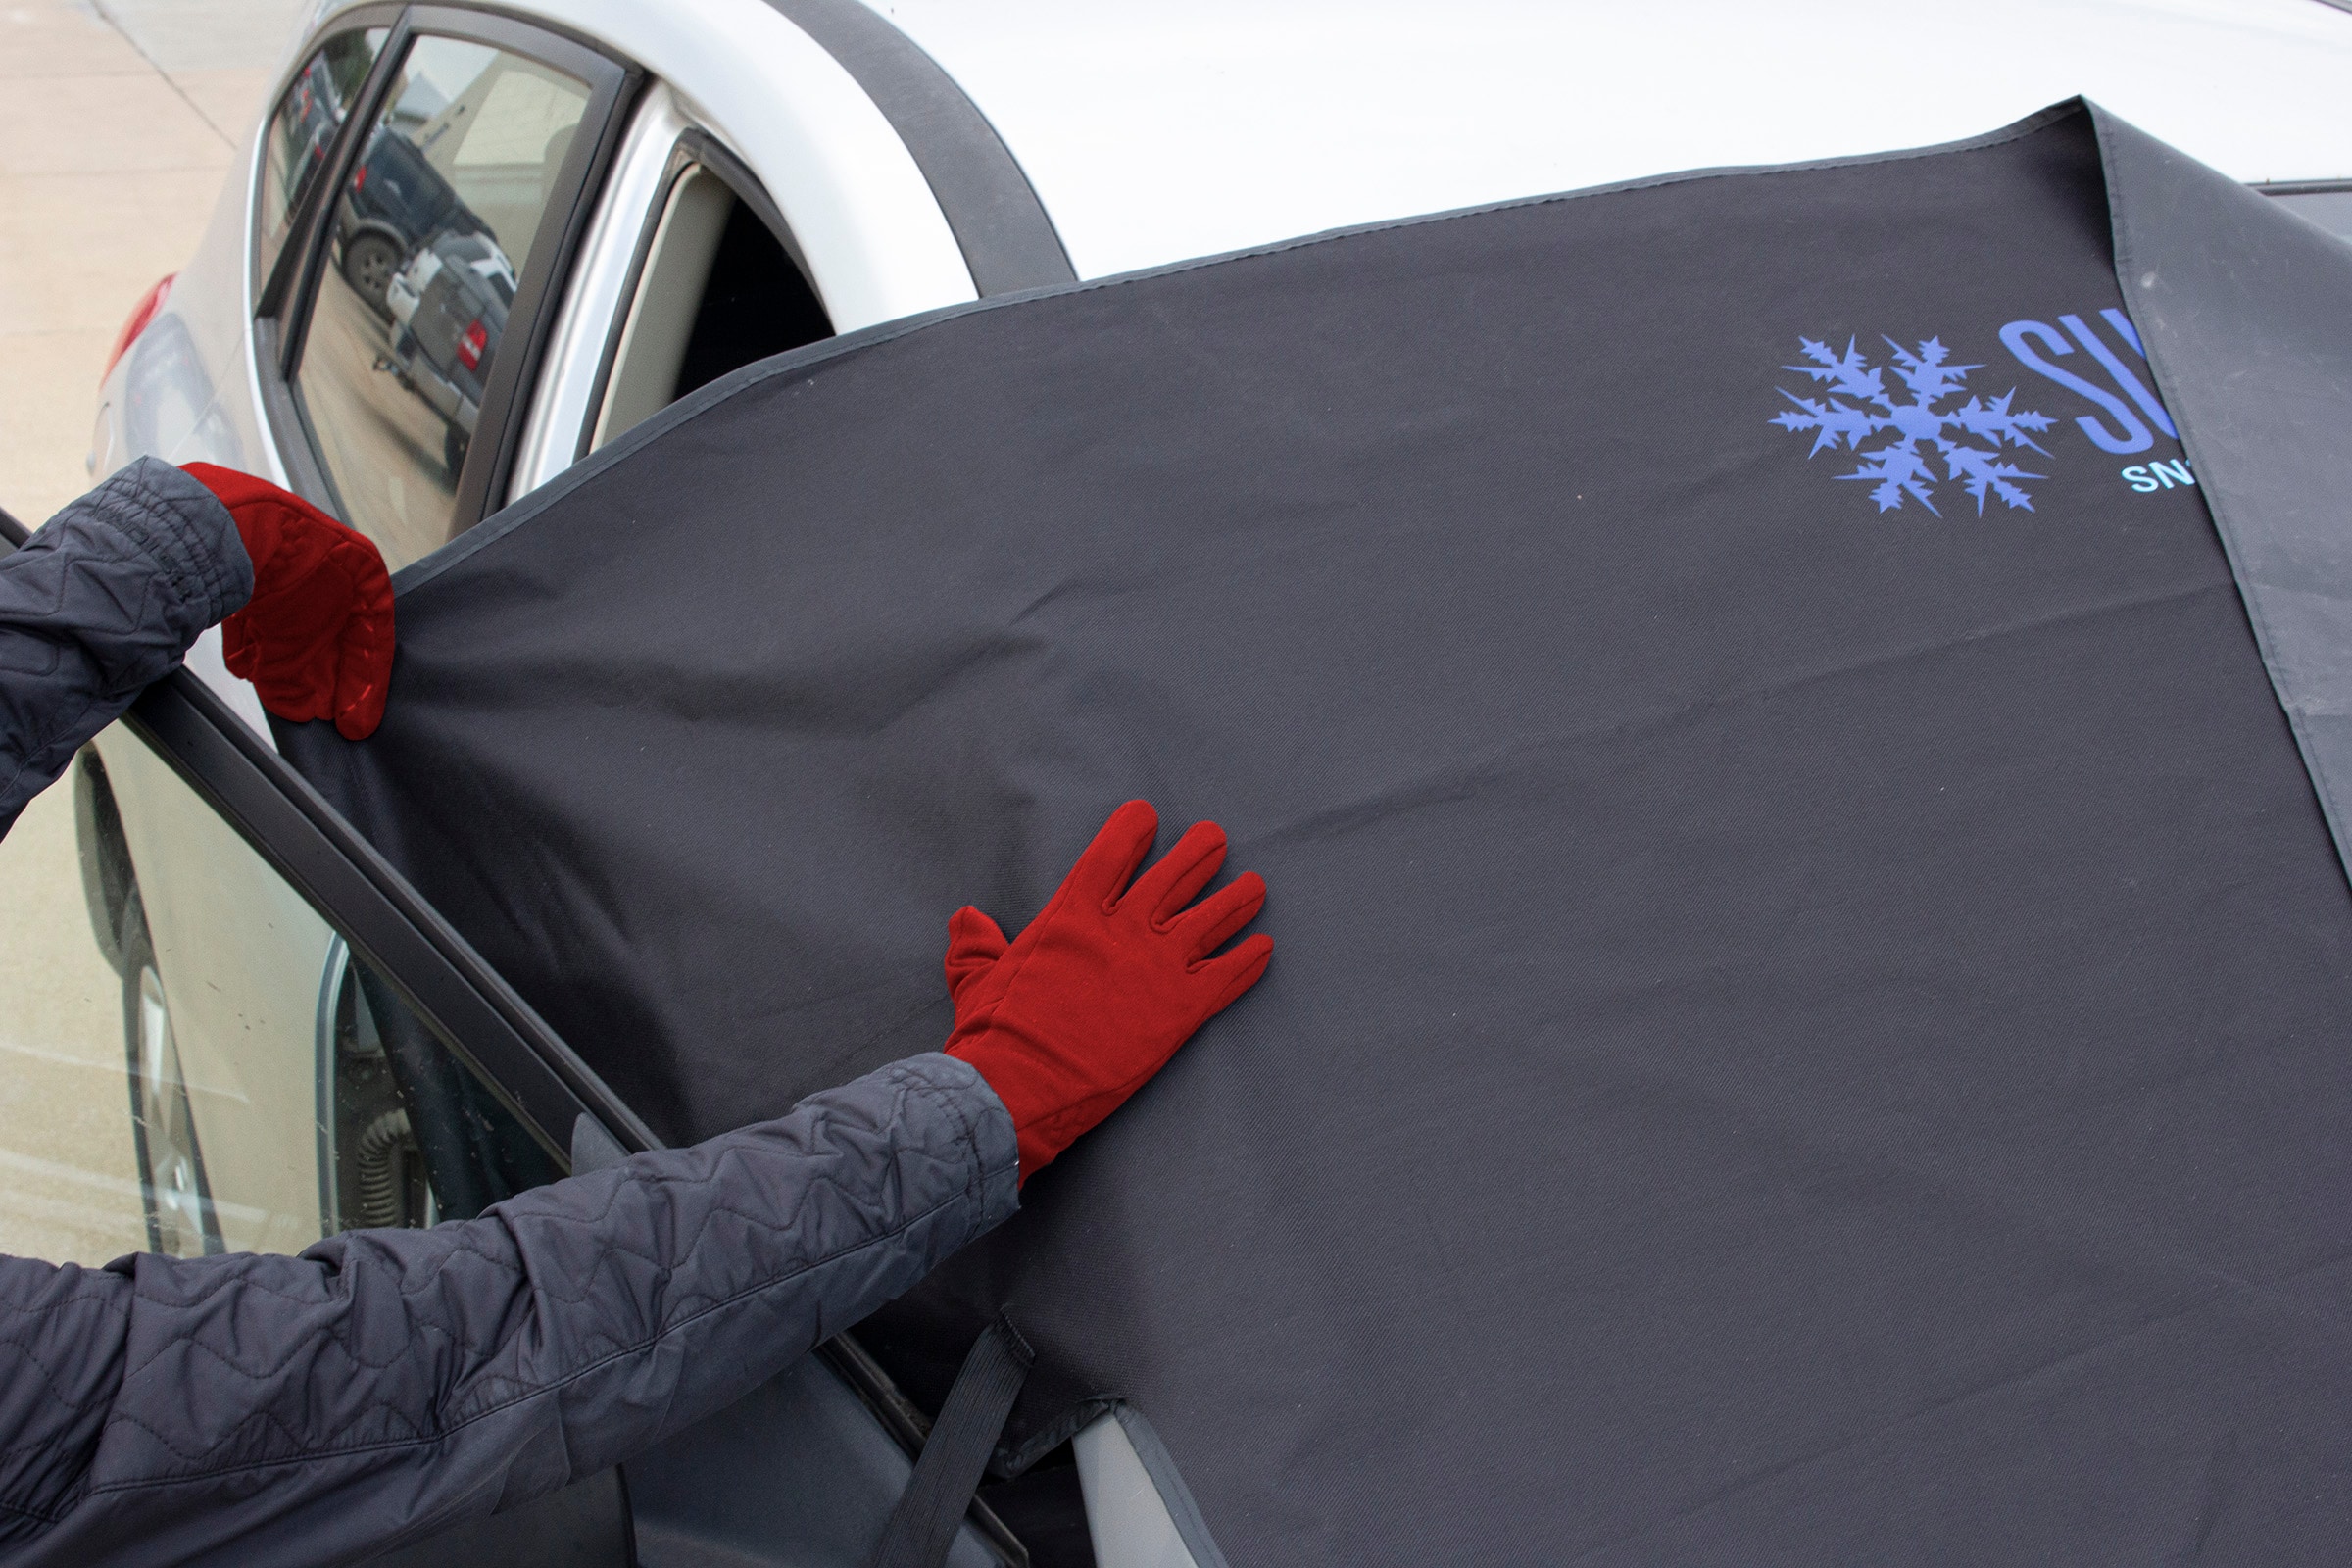 Car Windshield Snow Cover Frost Guard Protector Windshield Snow Frost Ice  Cover Sunshade Snow Covers Fits Most Car, SUV, Truck, Van or Automobile